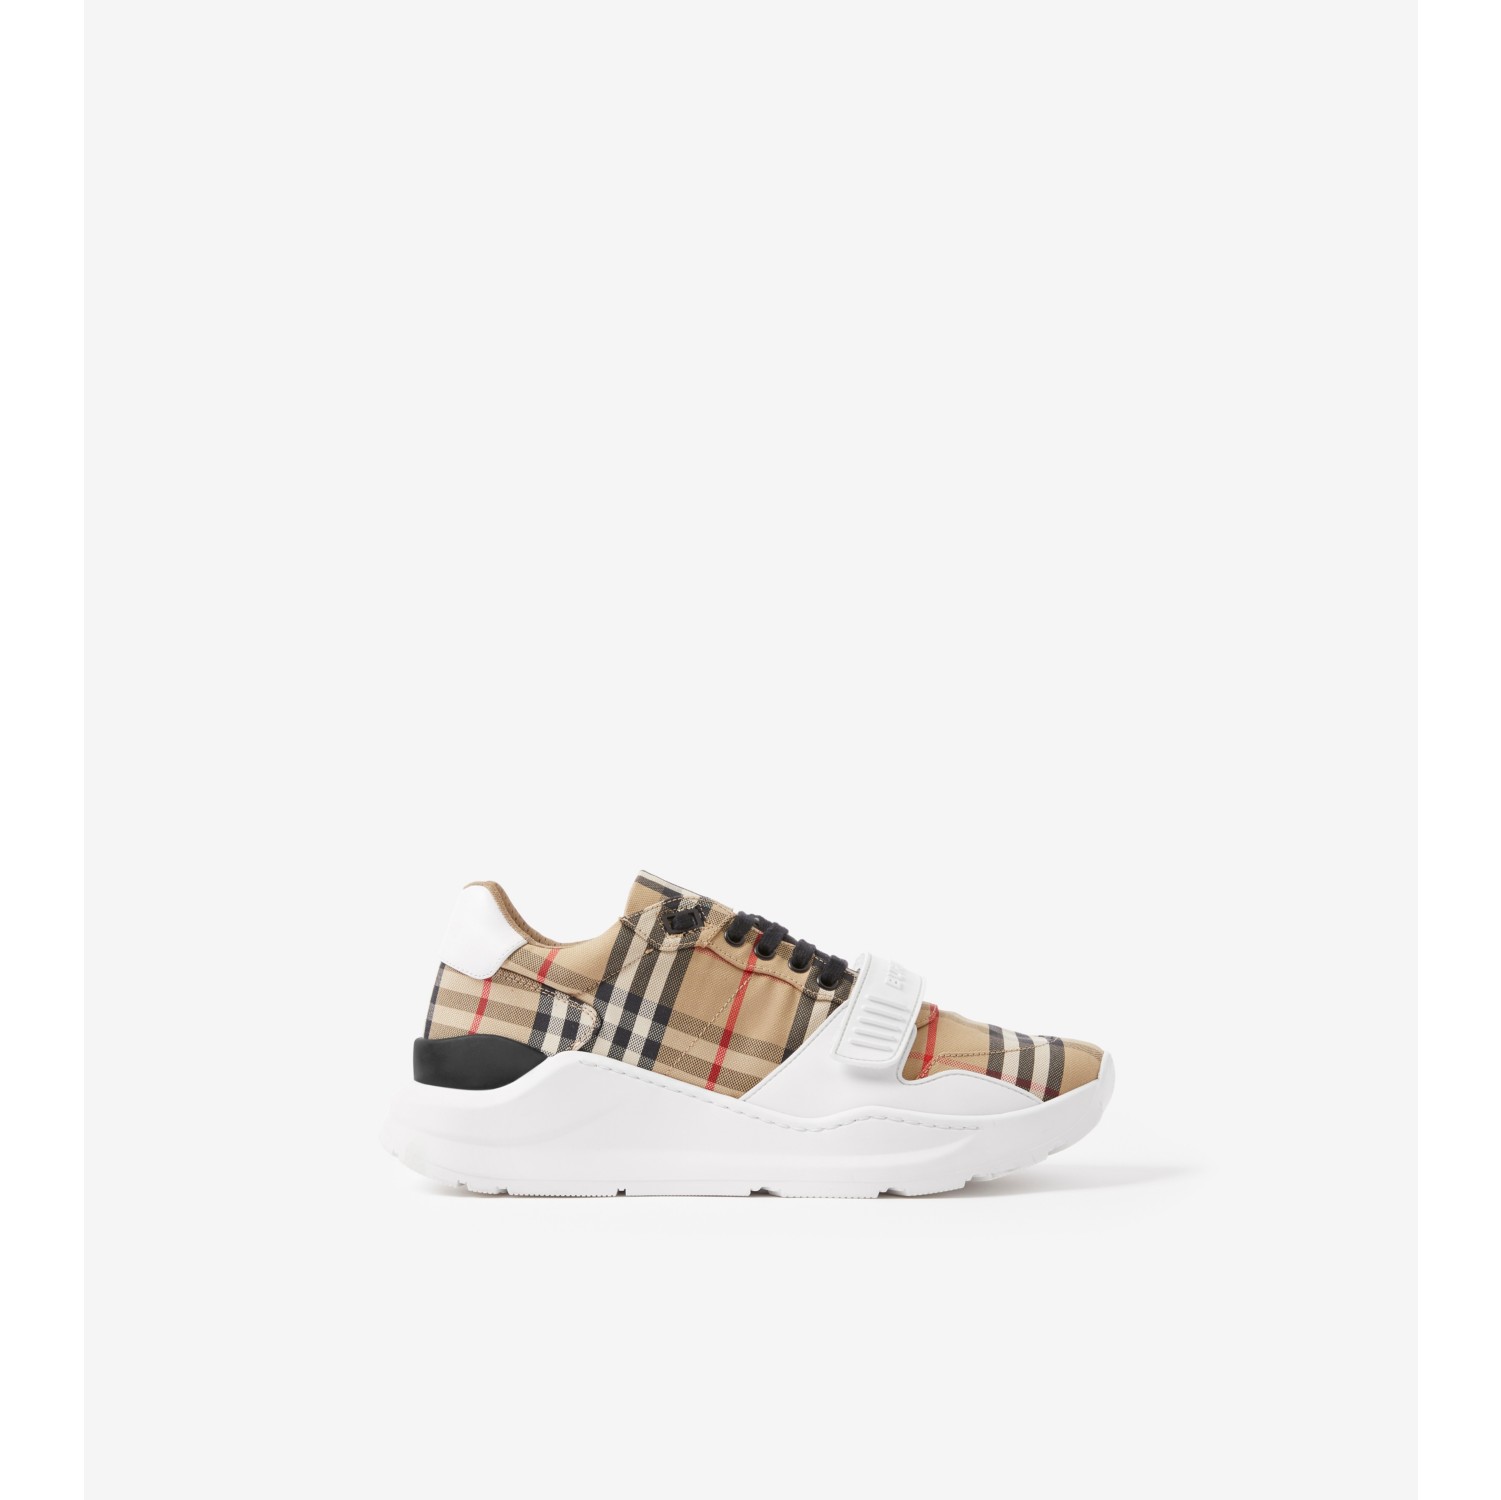 Burberry, Shoes